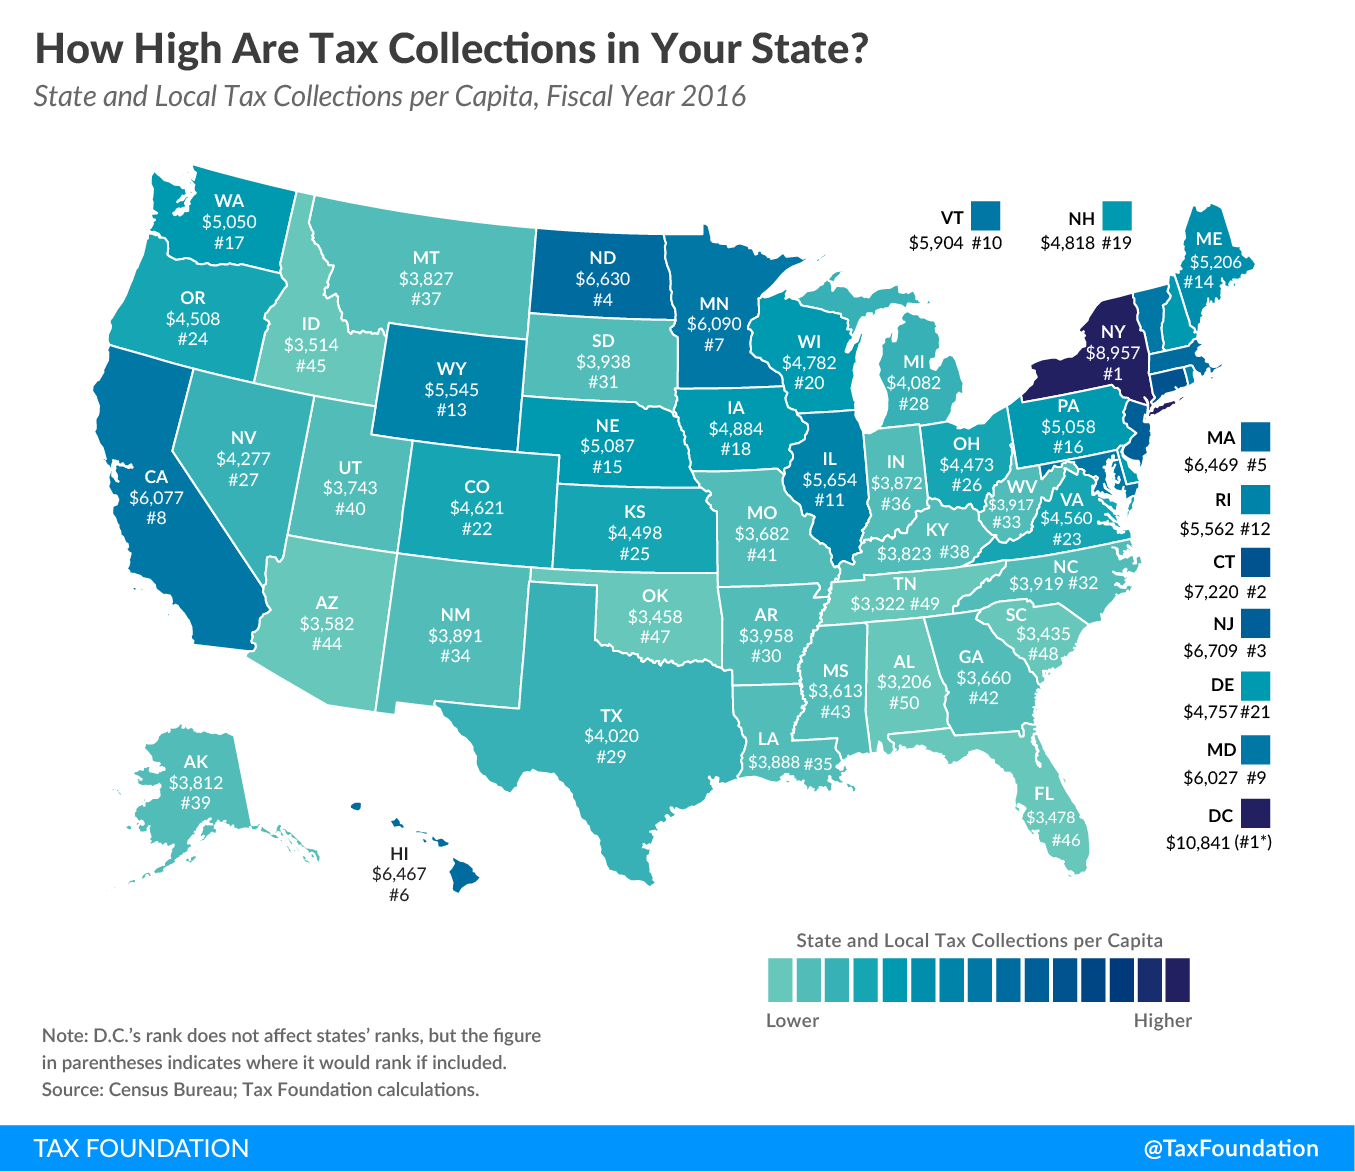 How high are state and local tax collections in your state? State and local tax collections per capita